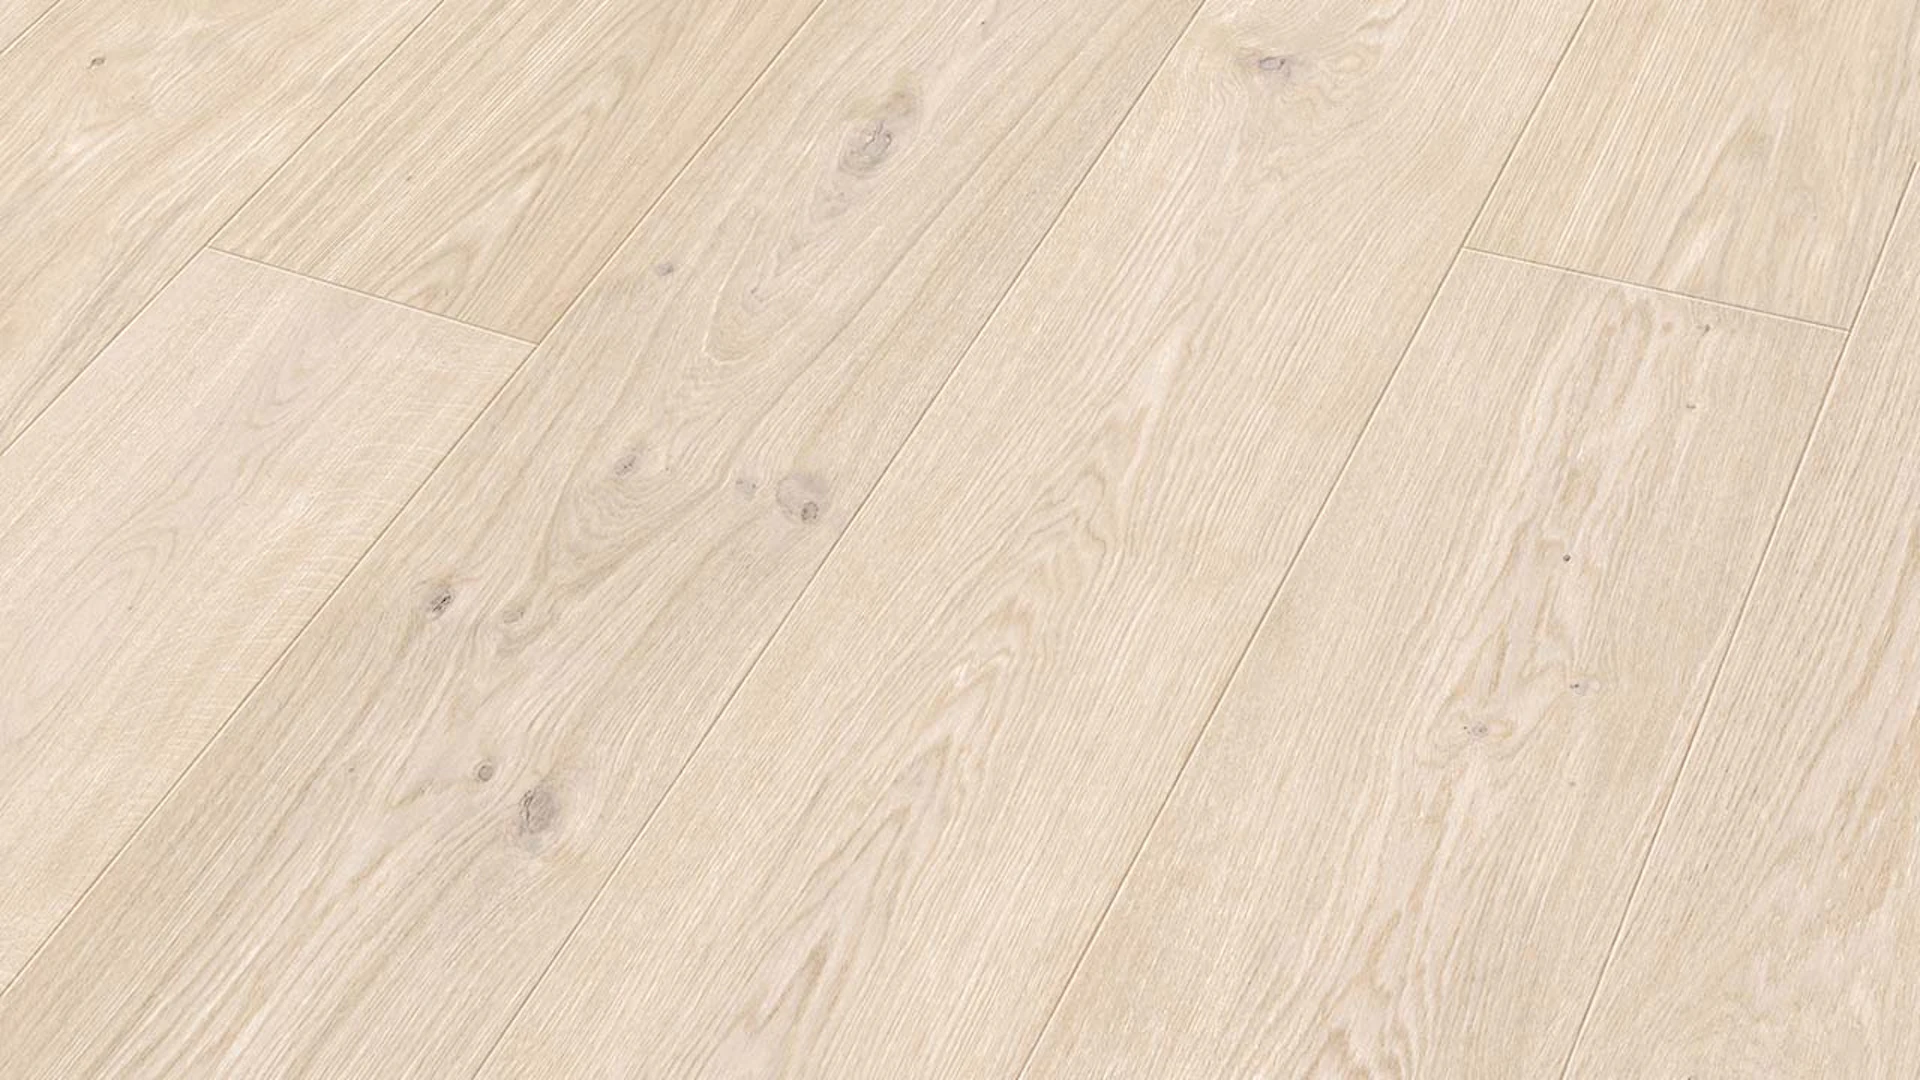 MEISTER Parquet Flooring - Longlife PD 400 Oak authentic white limed (500006-2200180-09003)